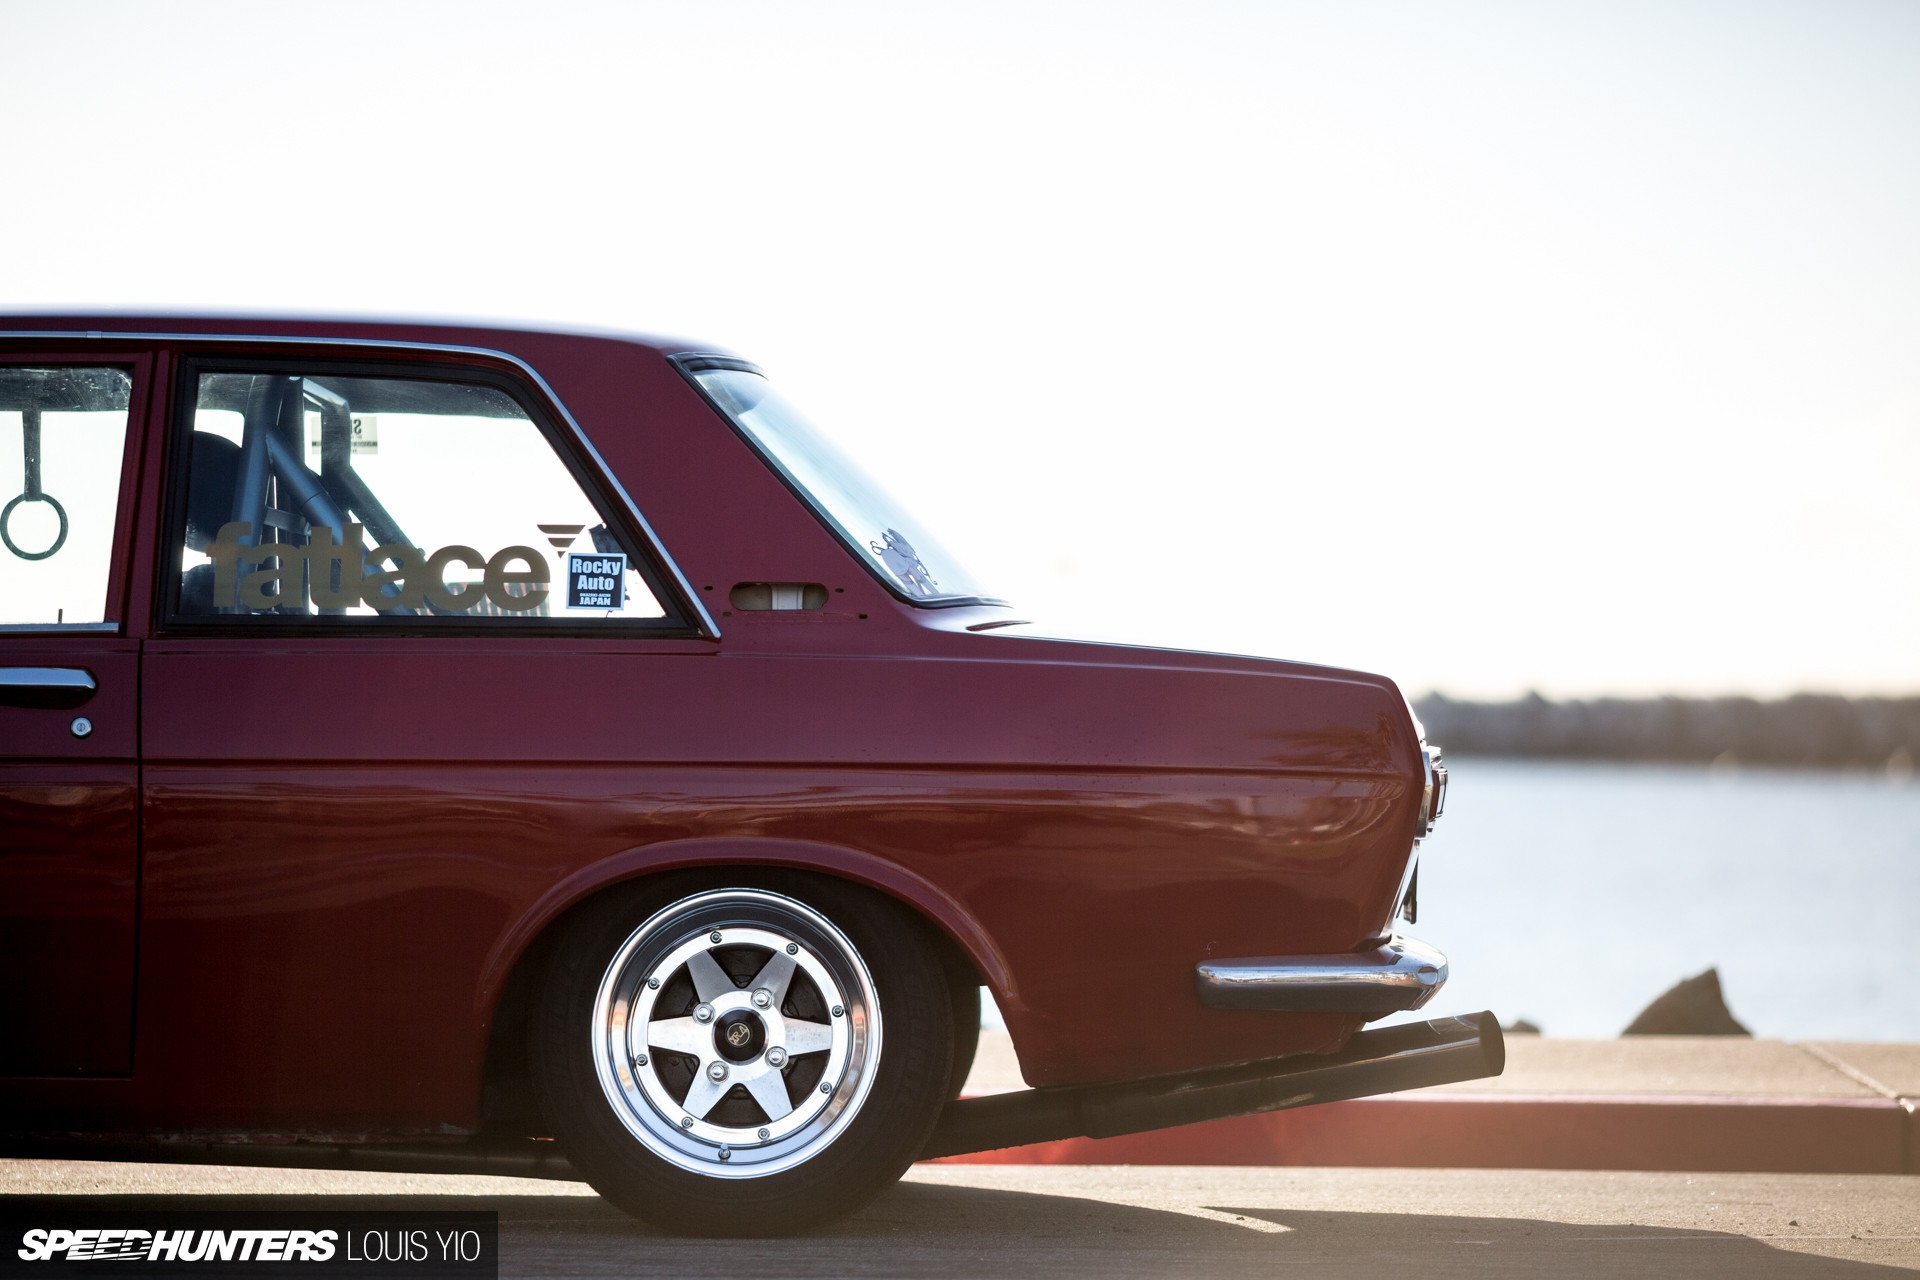 General 1920x1280 Nissan stance (cars) Nissan Bluebird red cars car vehicle Speedhunters watermarked